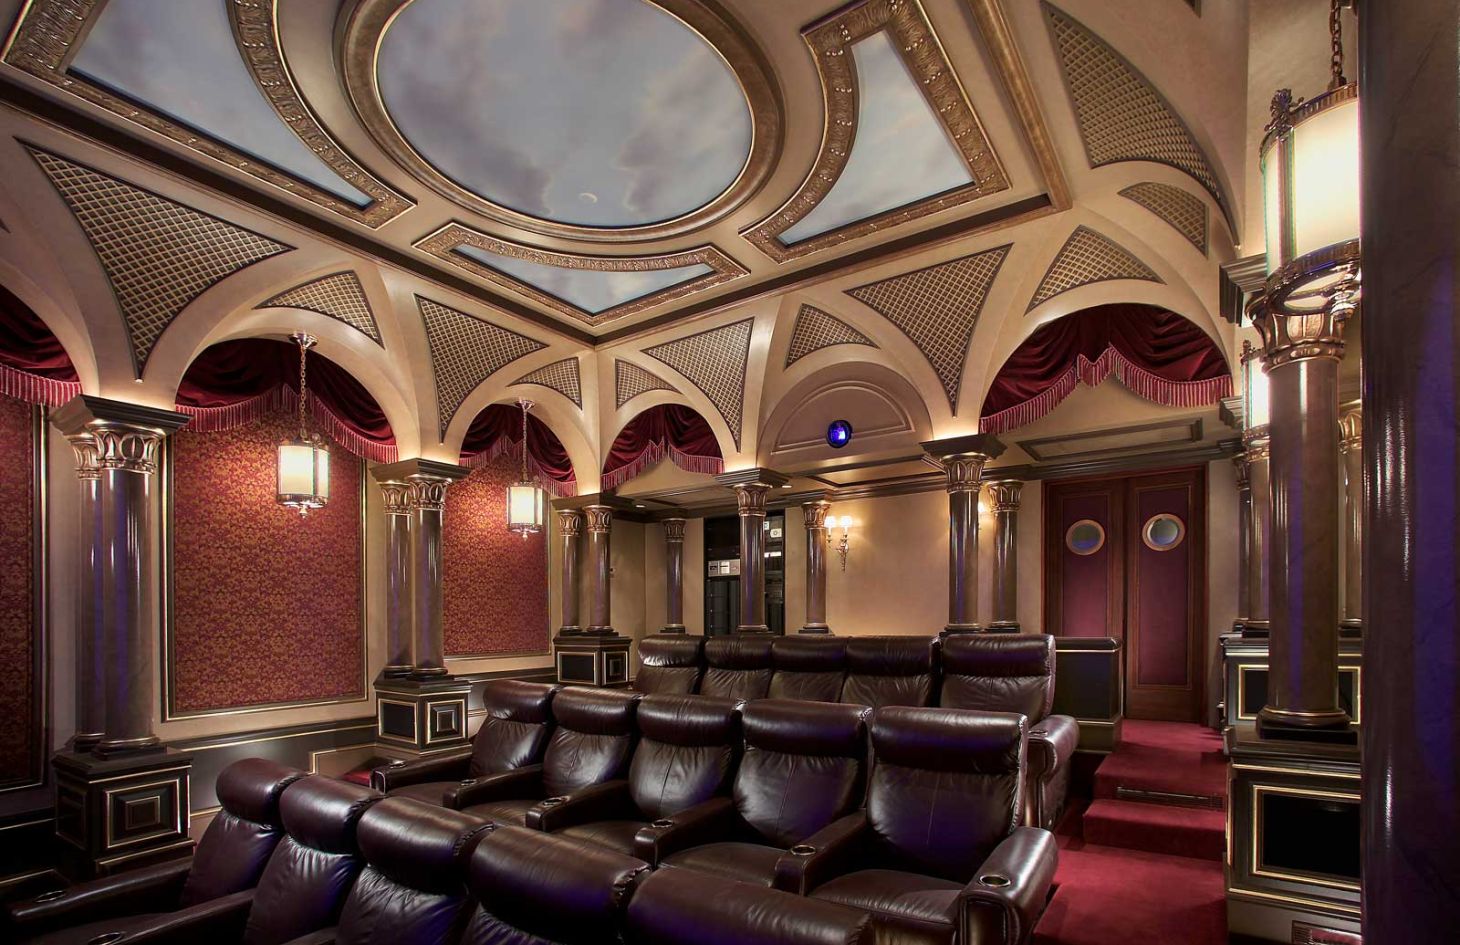 Home Theater, Traditional, Future Home Theater, Home Theater Installation, Details, Arch